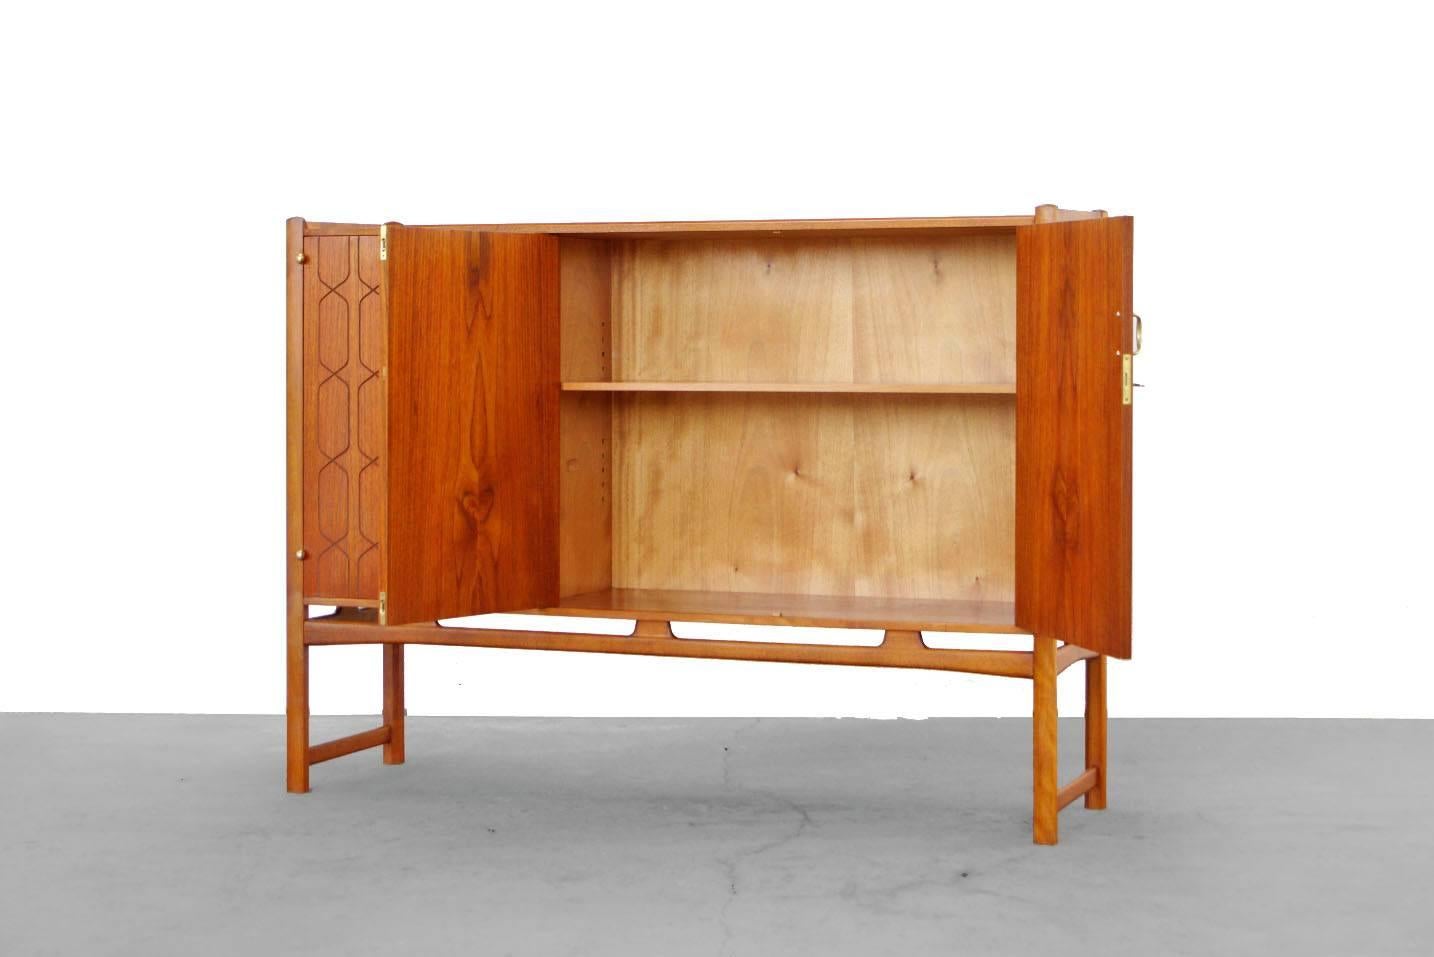 A unique Highboard by David Rosén for Nordiska.
This charming cabinet is very well crafted and is highllighted by
the gorgeaus material selection, unique brass hardware, solid teak and beech wood mix. A highlight is the engraved pattern on the